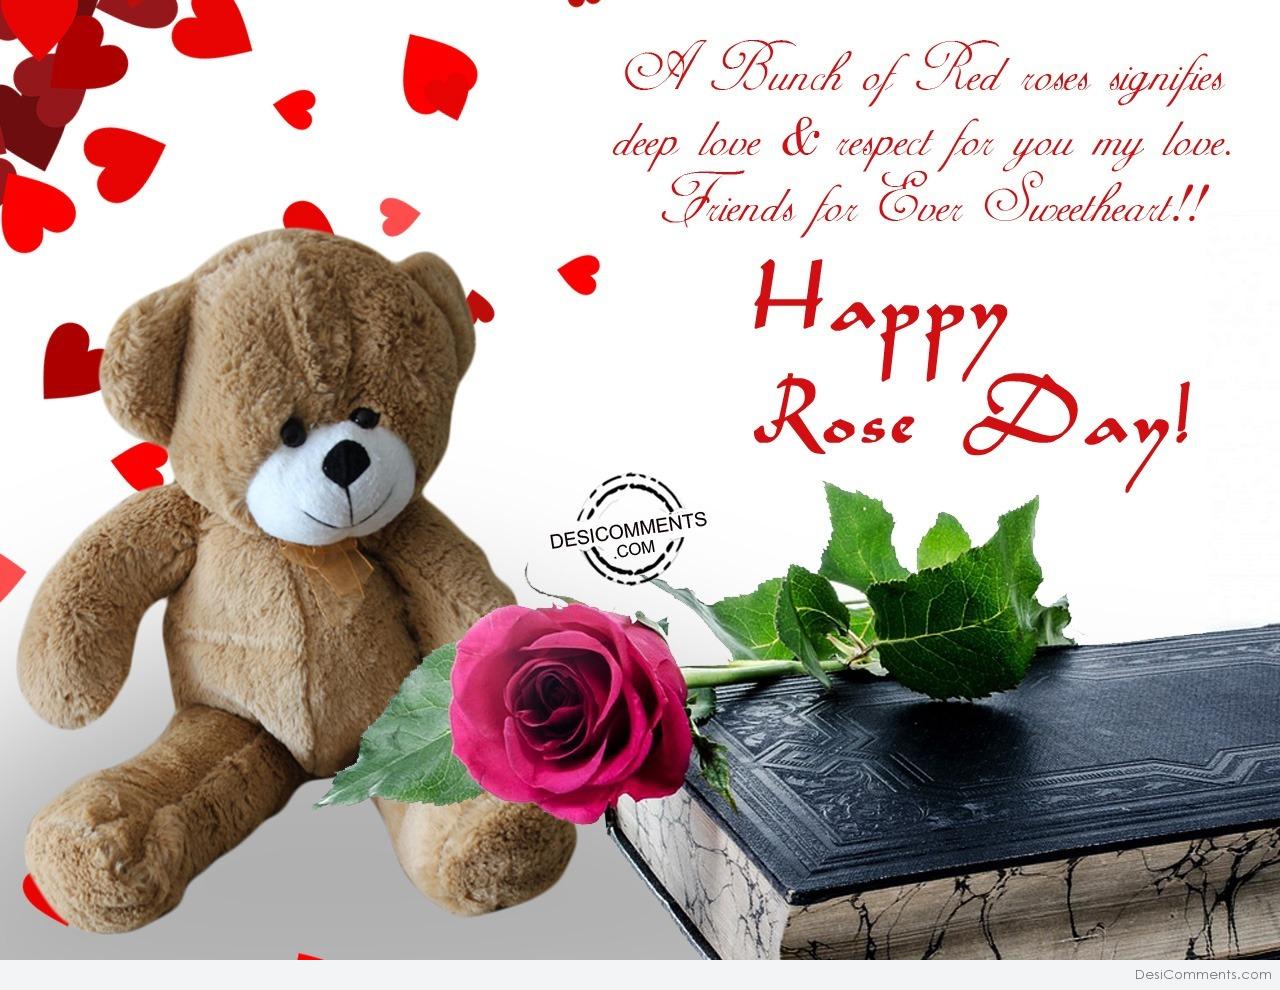 A bunch of red roses sgnifies, Happy Rose Day - DesiComments.com